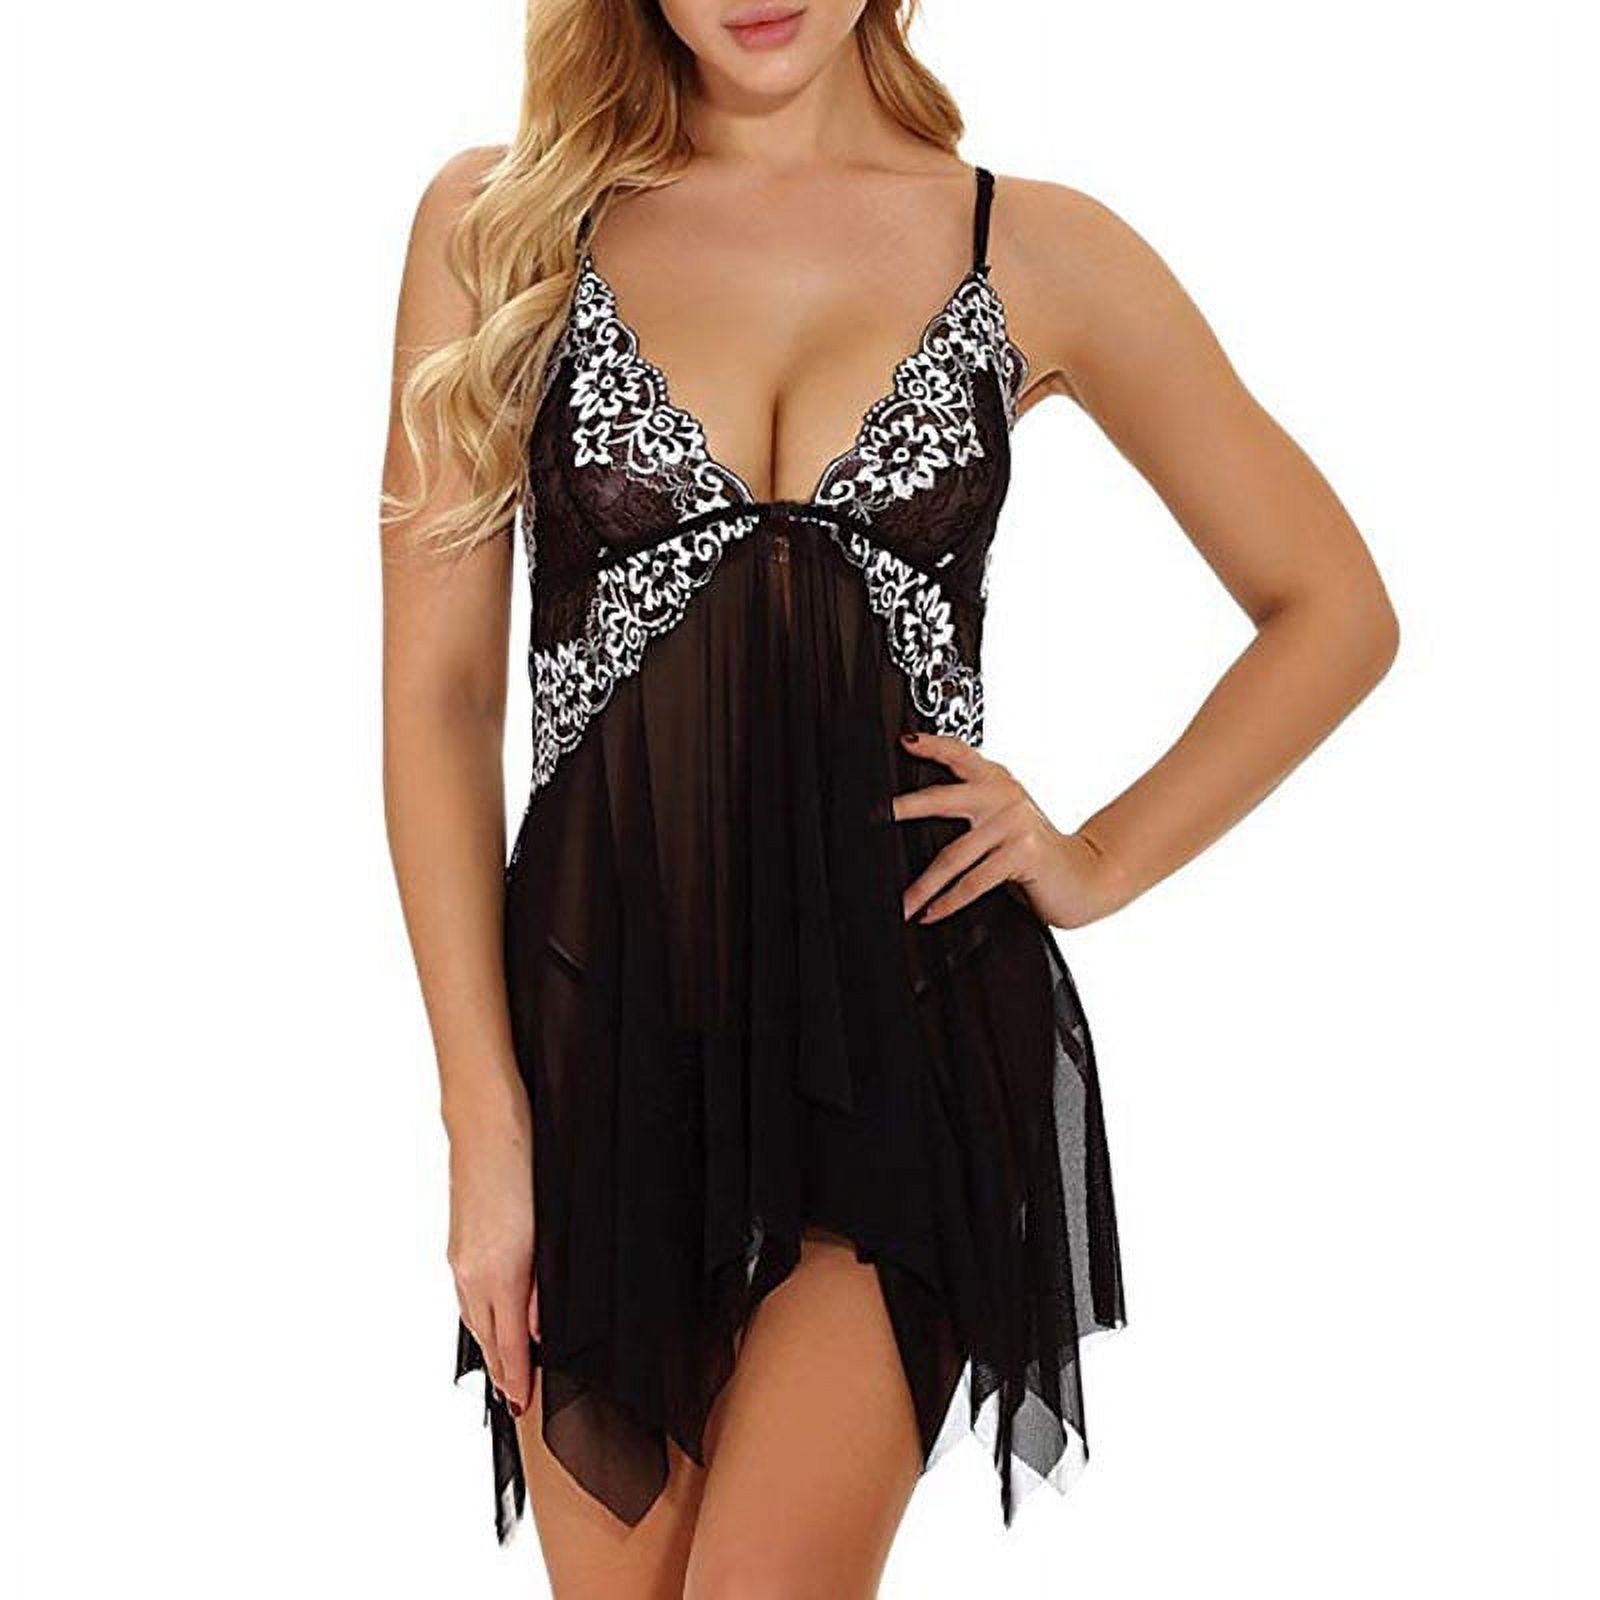 Women V Neck Floral Lace Lingerie Set Open Front Sexy Sheer Babydoll Mesh Chemise - image 1 of 2